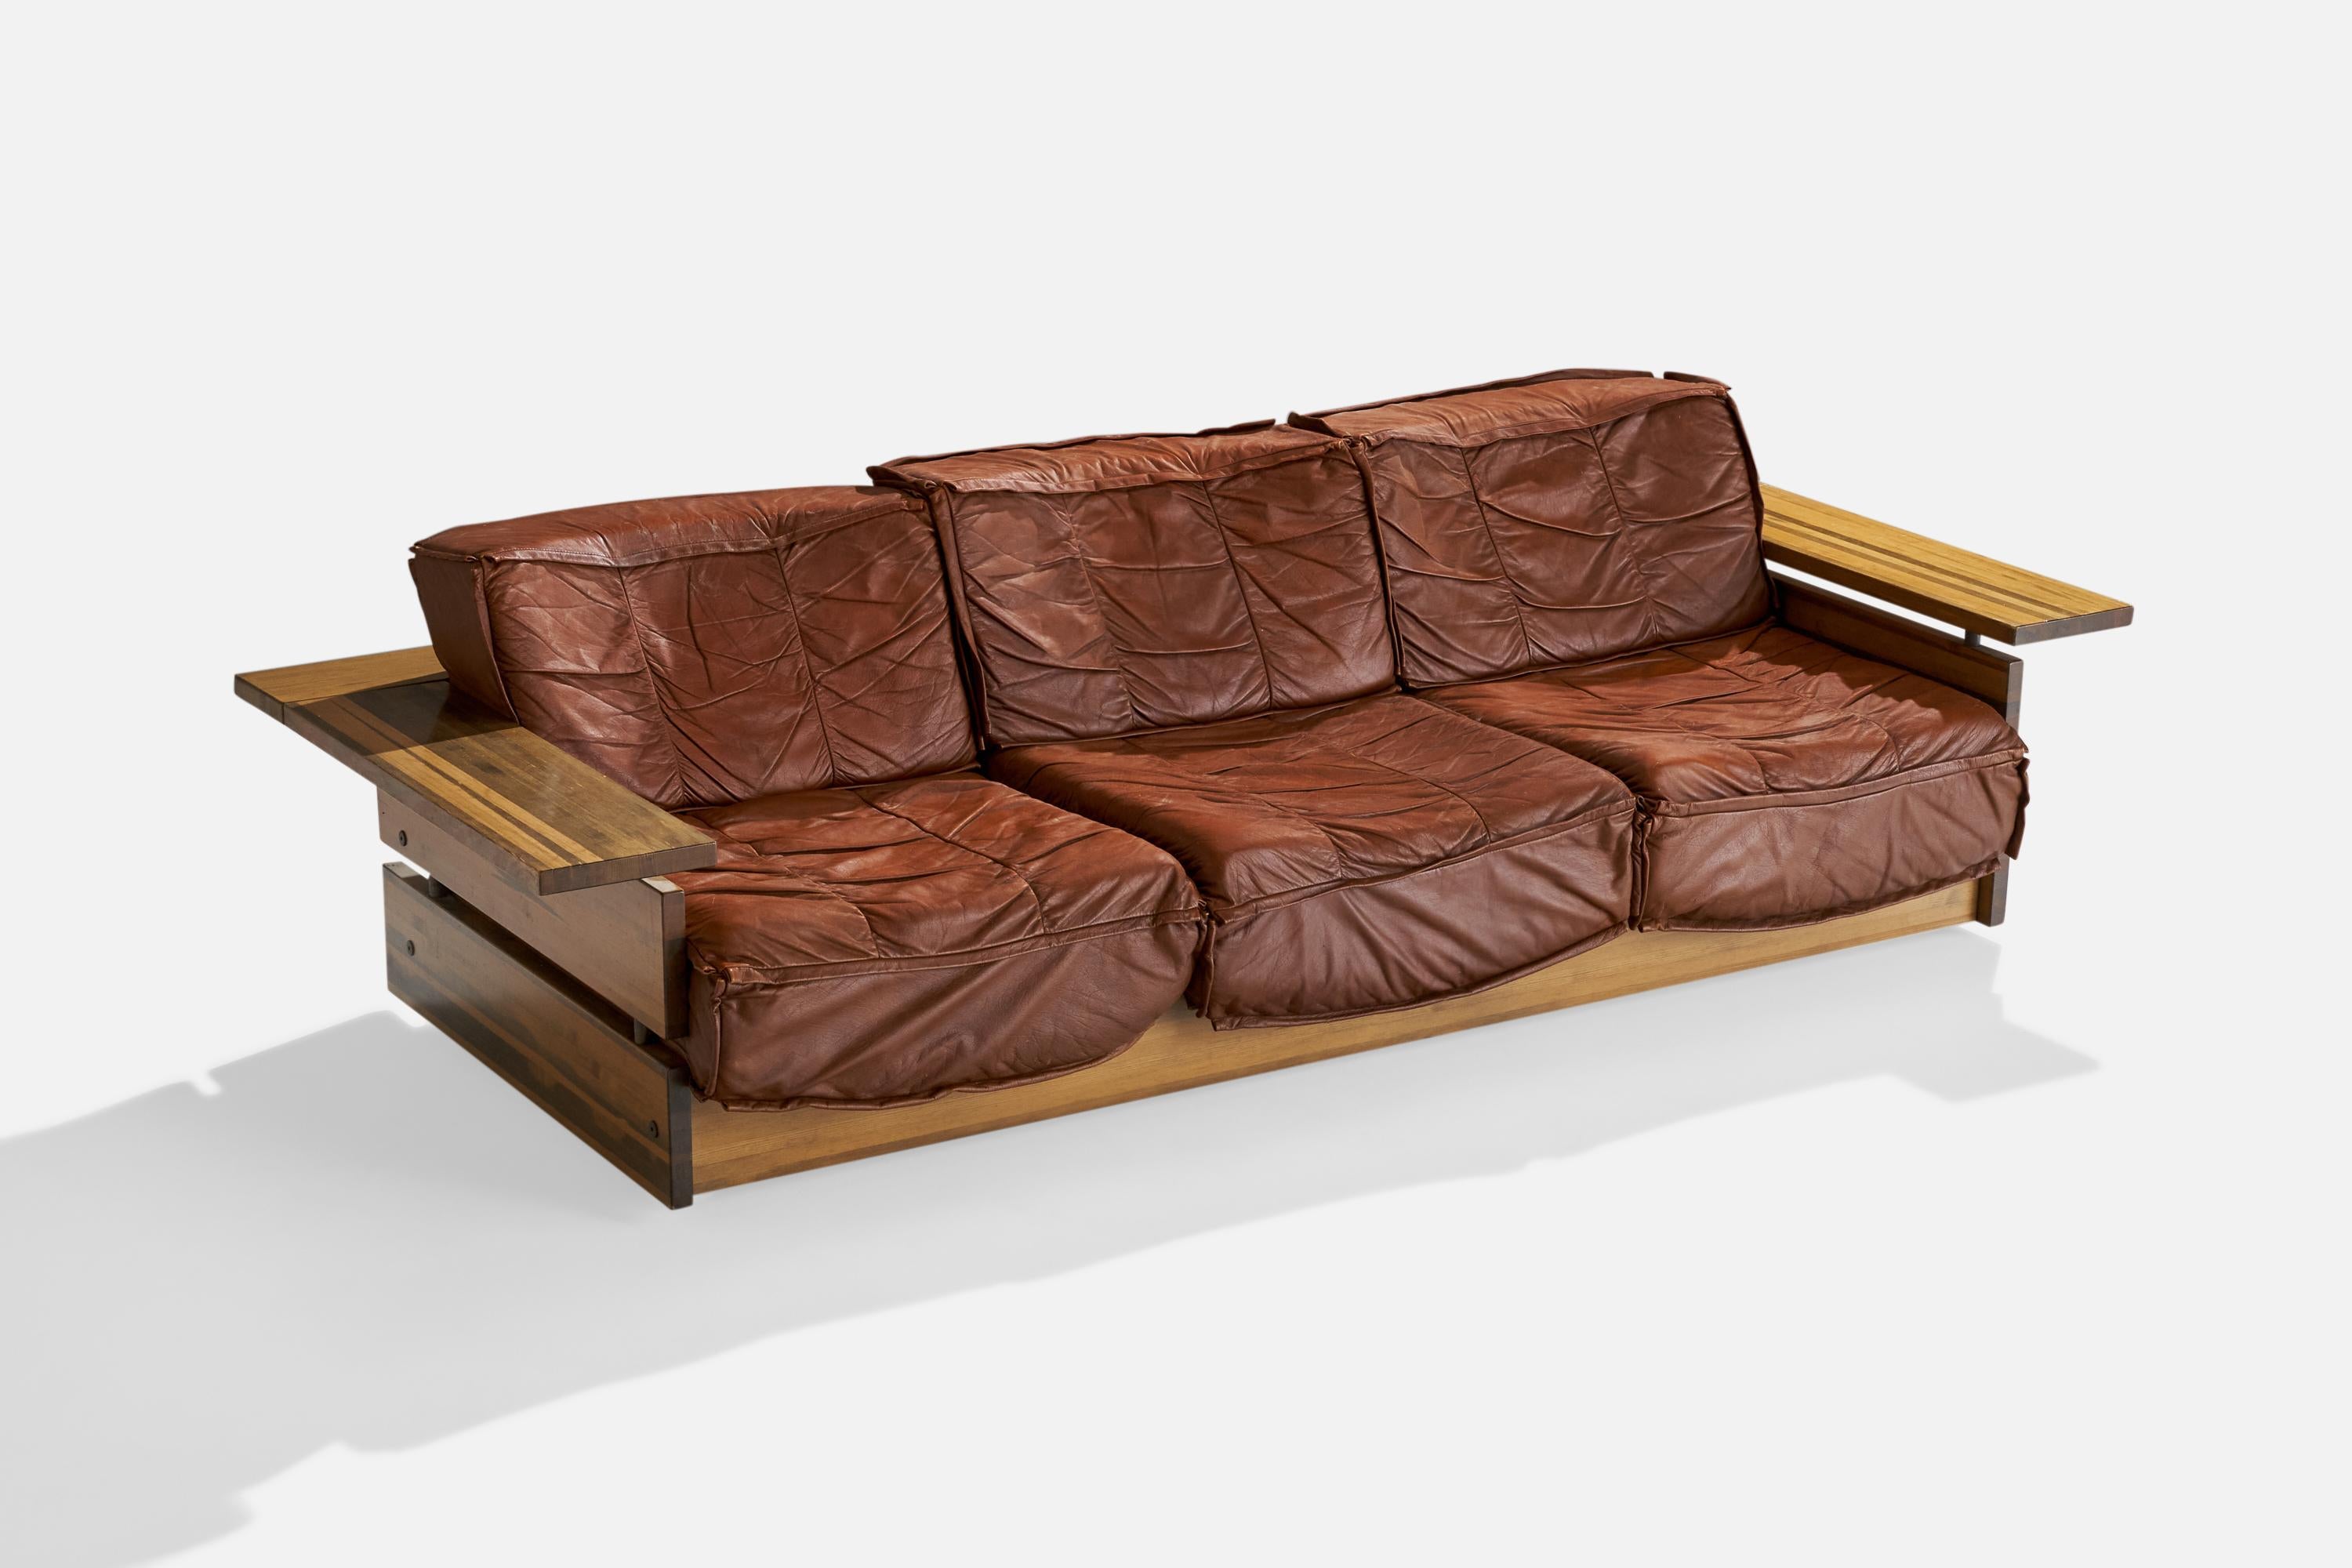 A pine and brown leather sofa designed and produced by Hämeen Kalustaja, Finland, 1970s.

Seat height 14”.